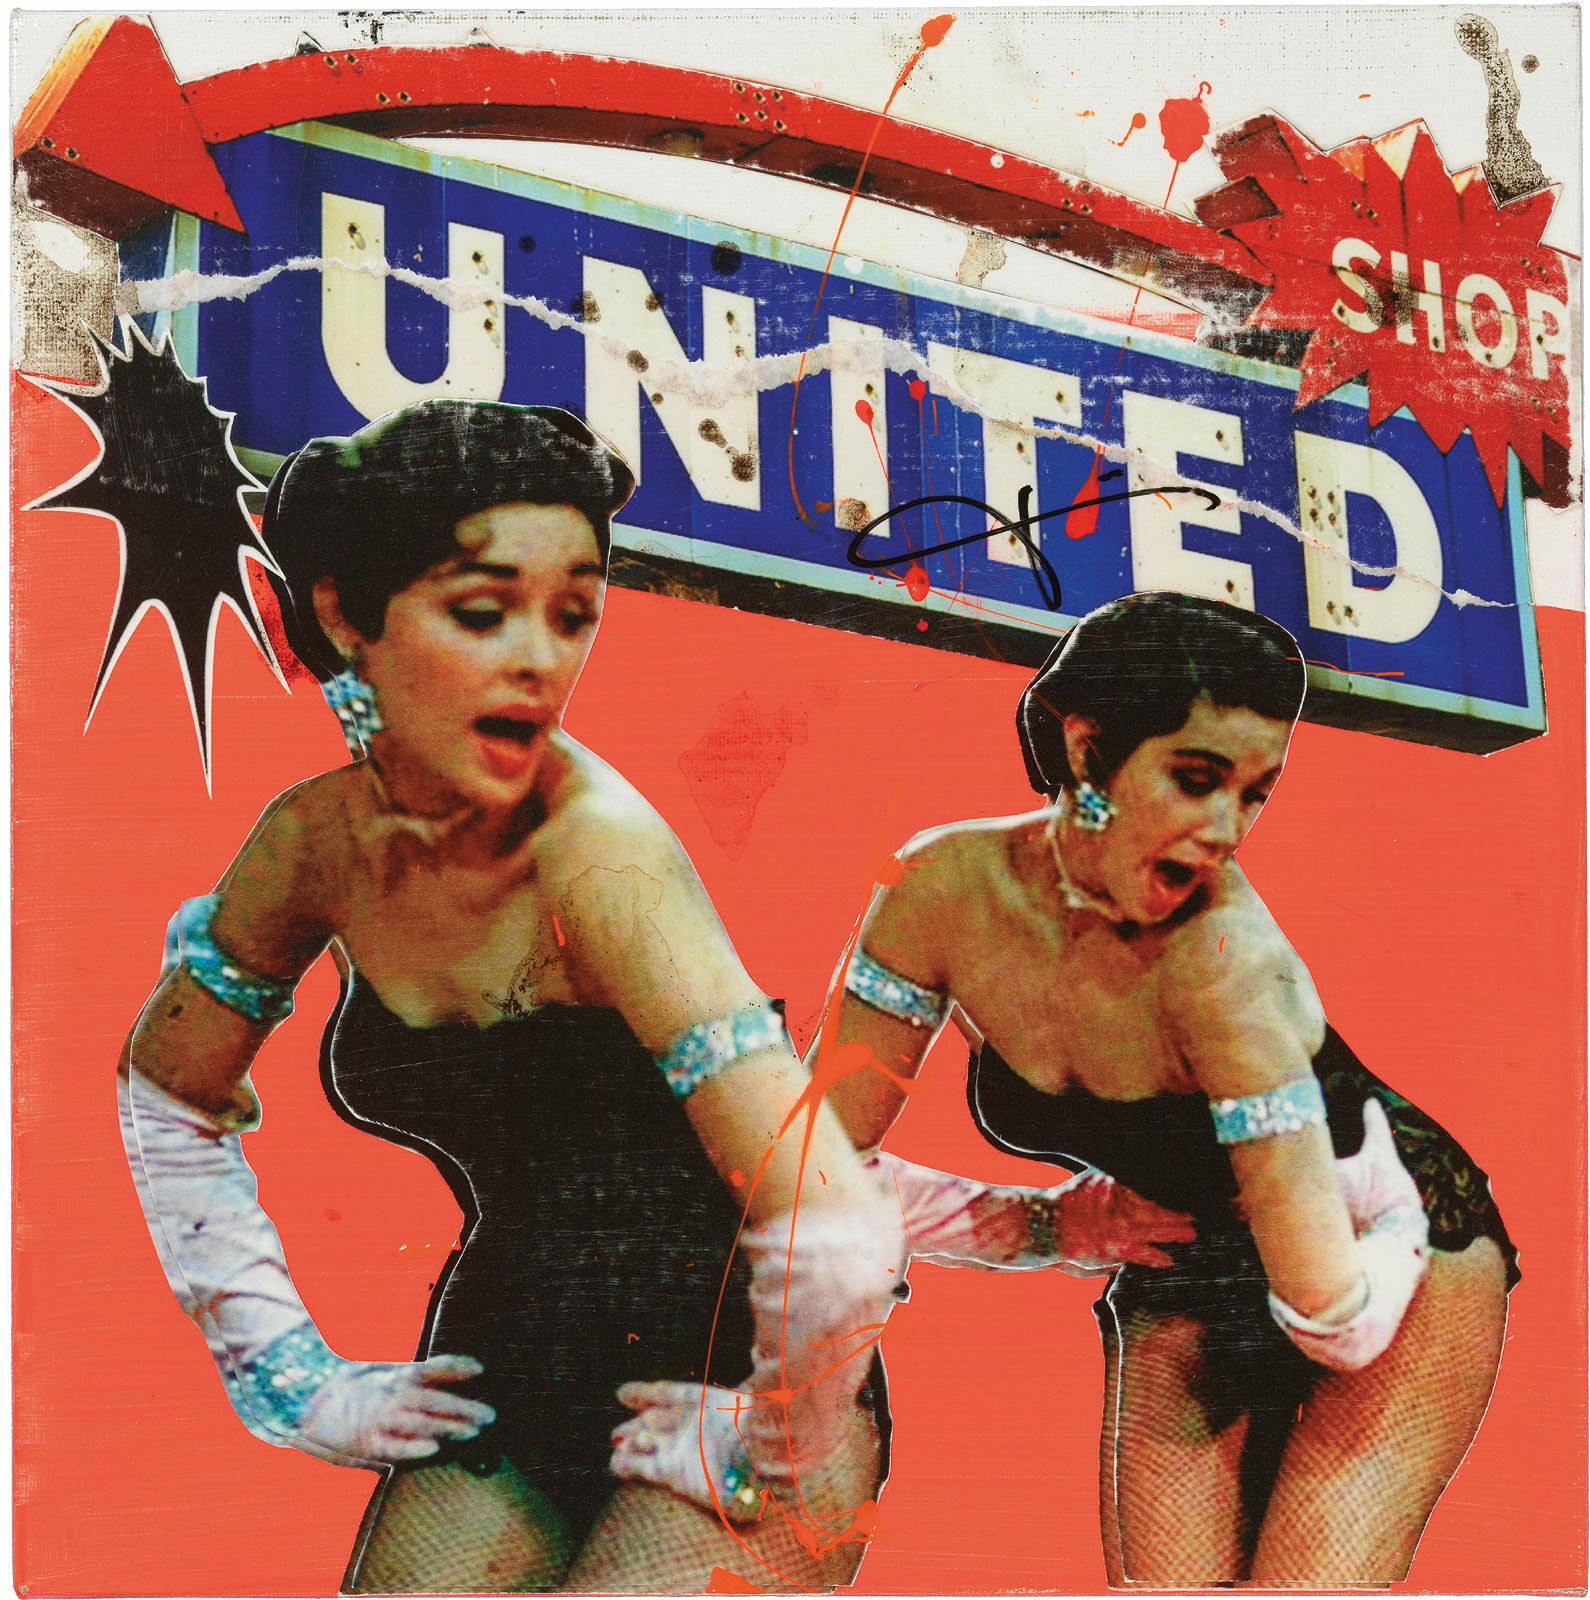 Picture "Shop United" (2015) by Jörg Döring